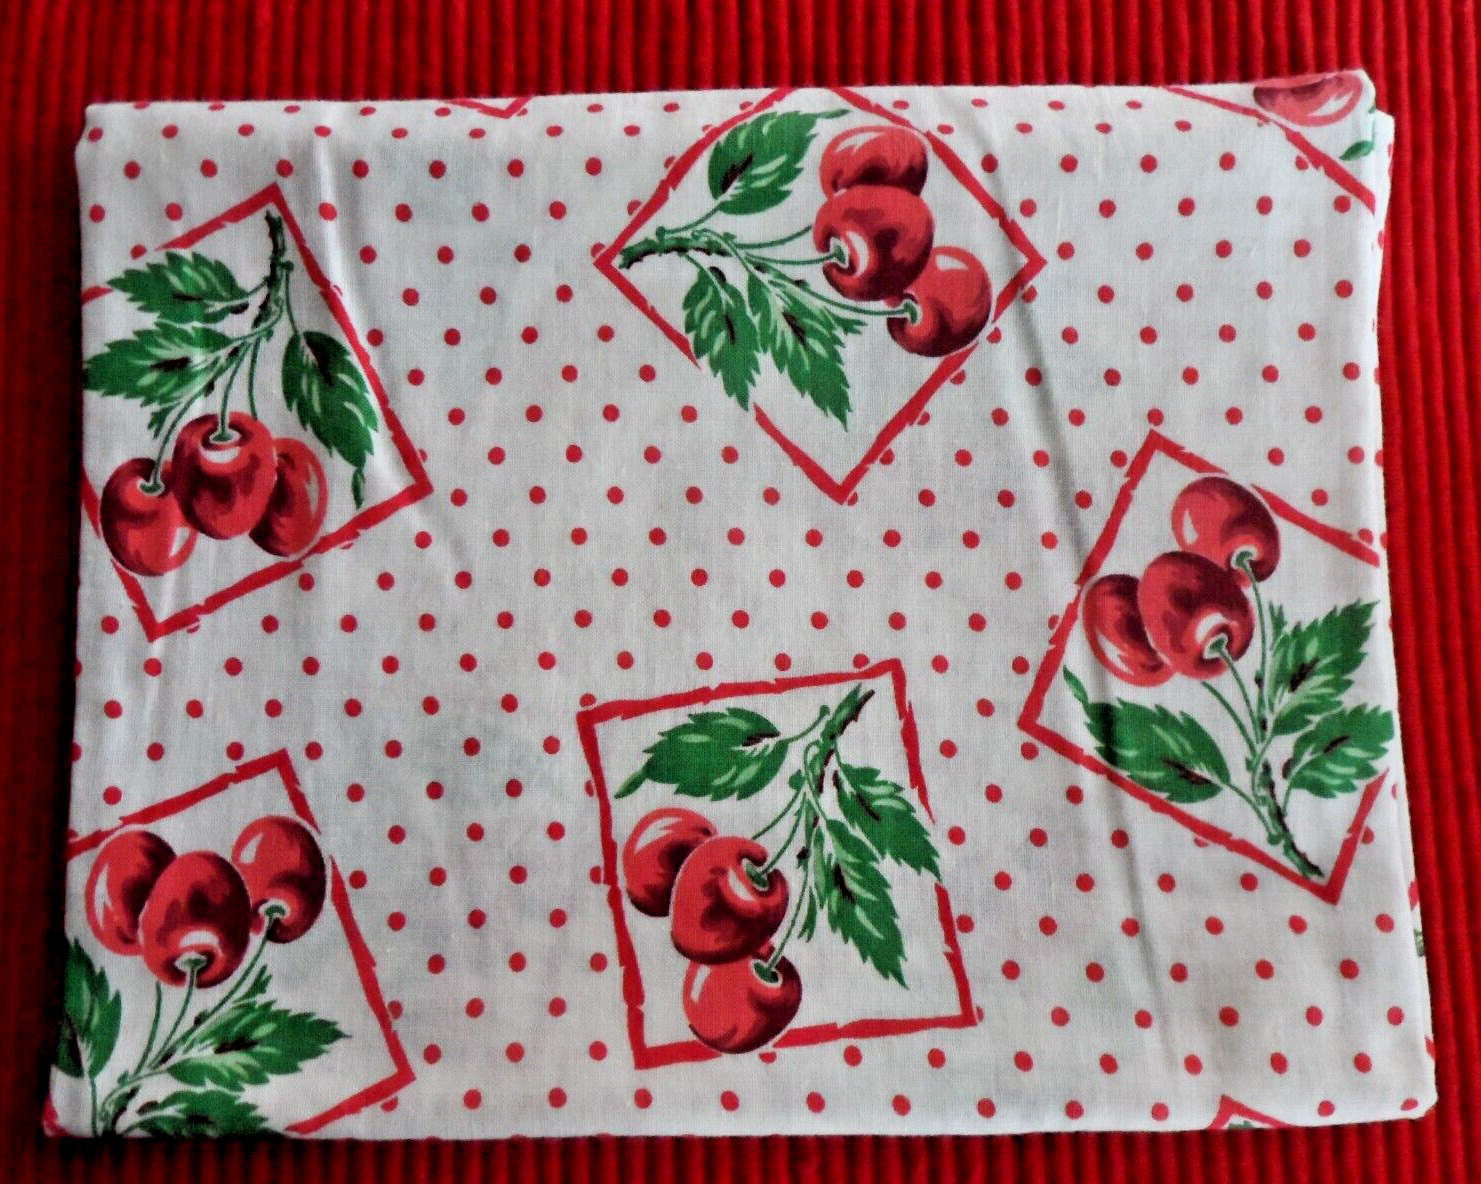 /Vintage Feed Sack Pretty Cherries in Squares on Red Polka Dots     46\